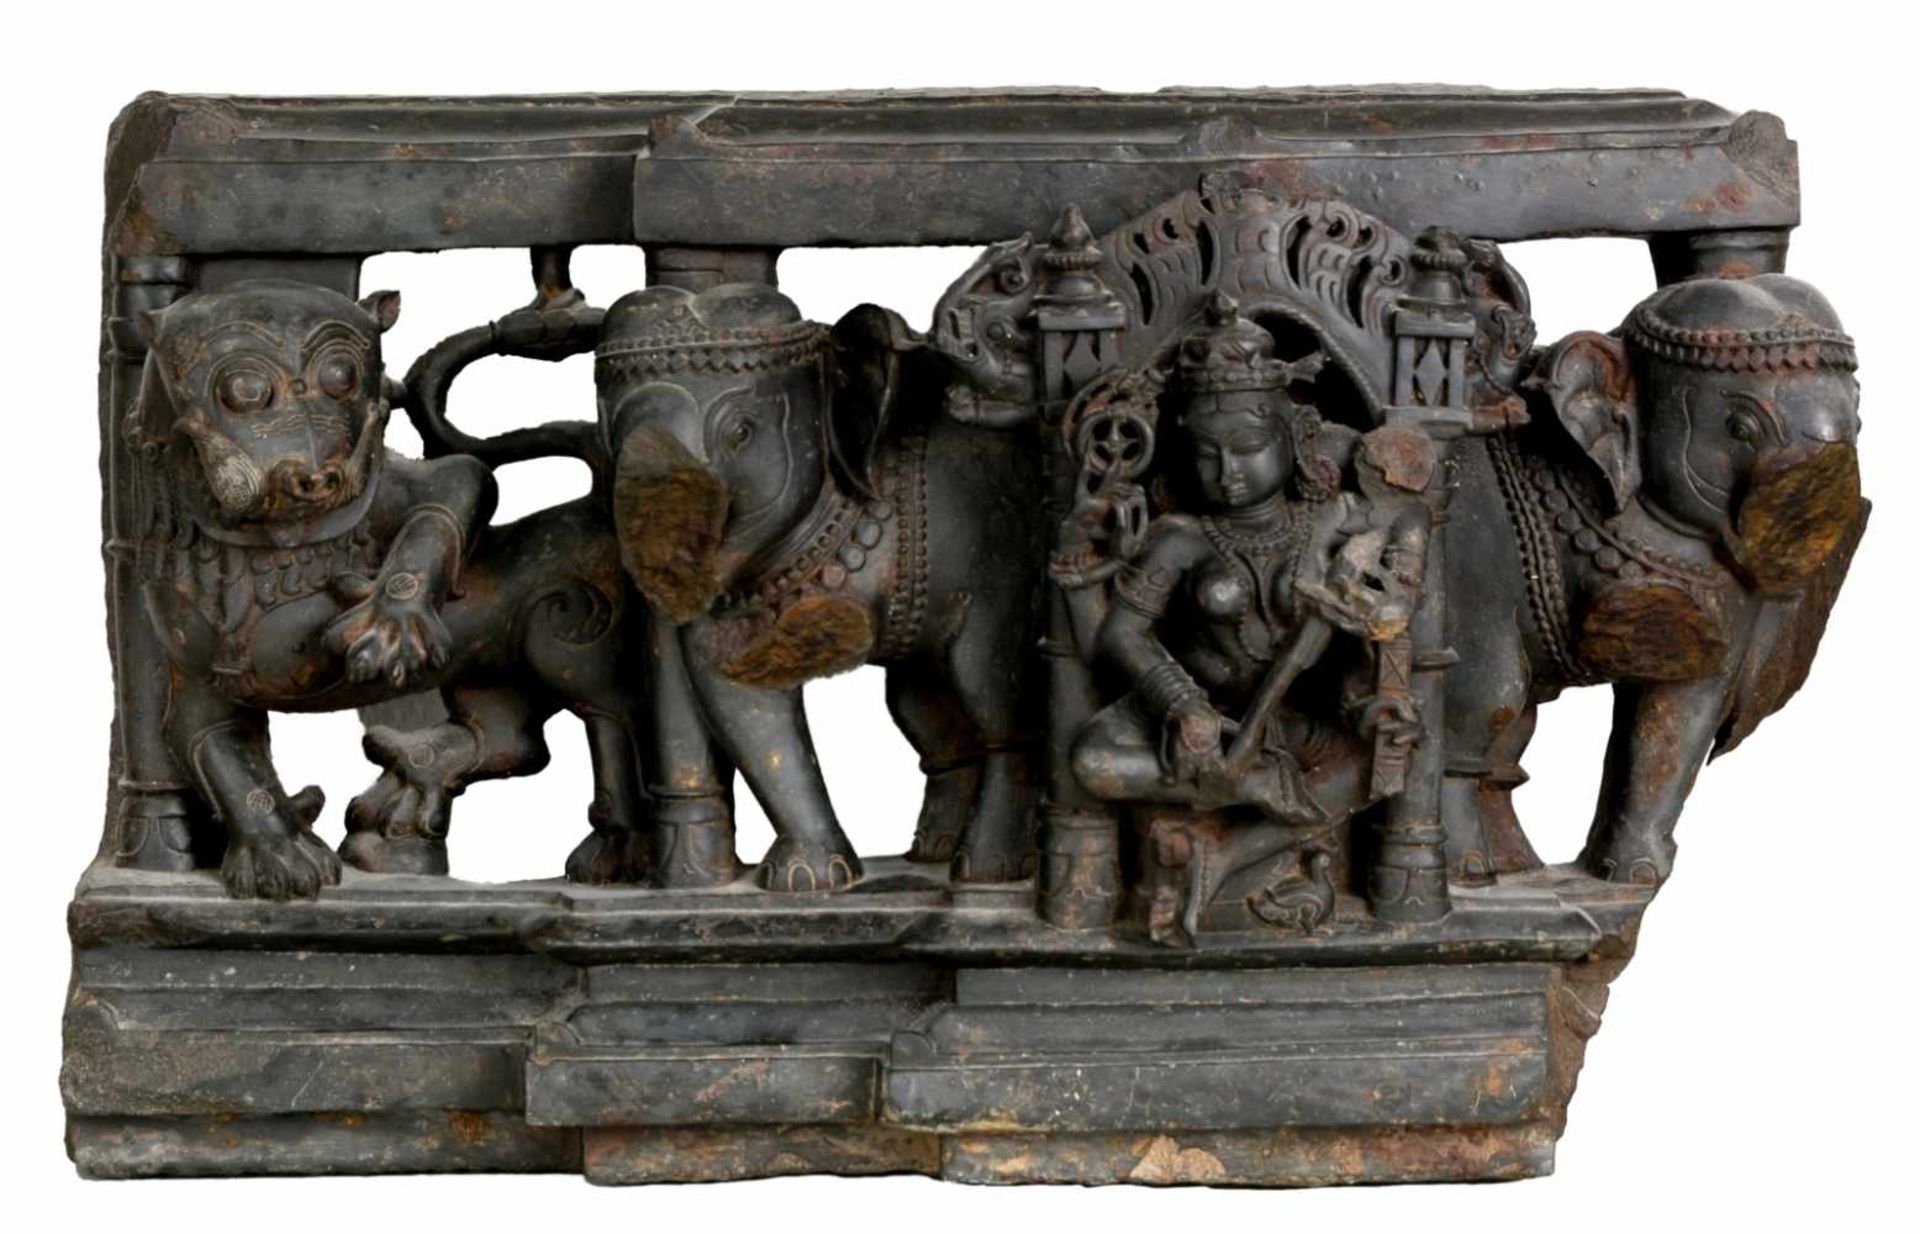 The Goddess Laksmi between lions and elefants, South-Indian frieze, probably 8th c., 32,5